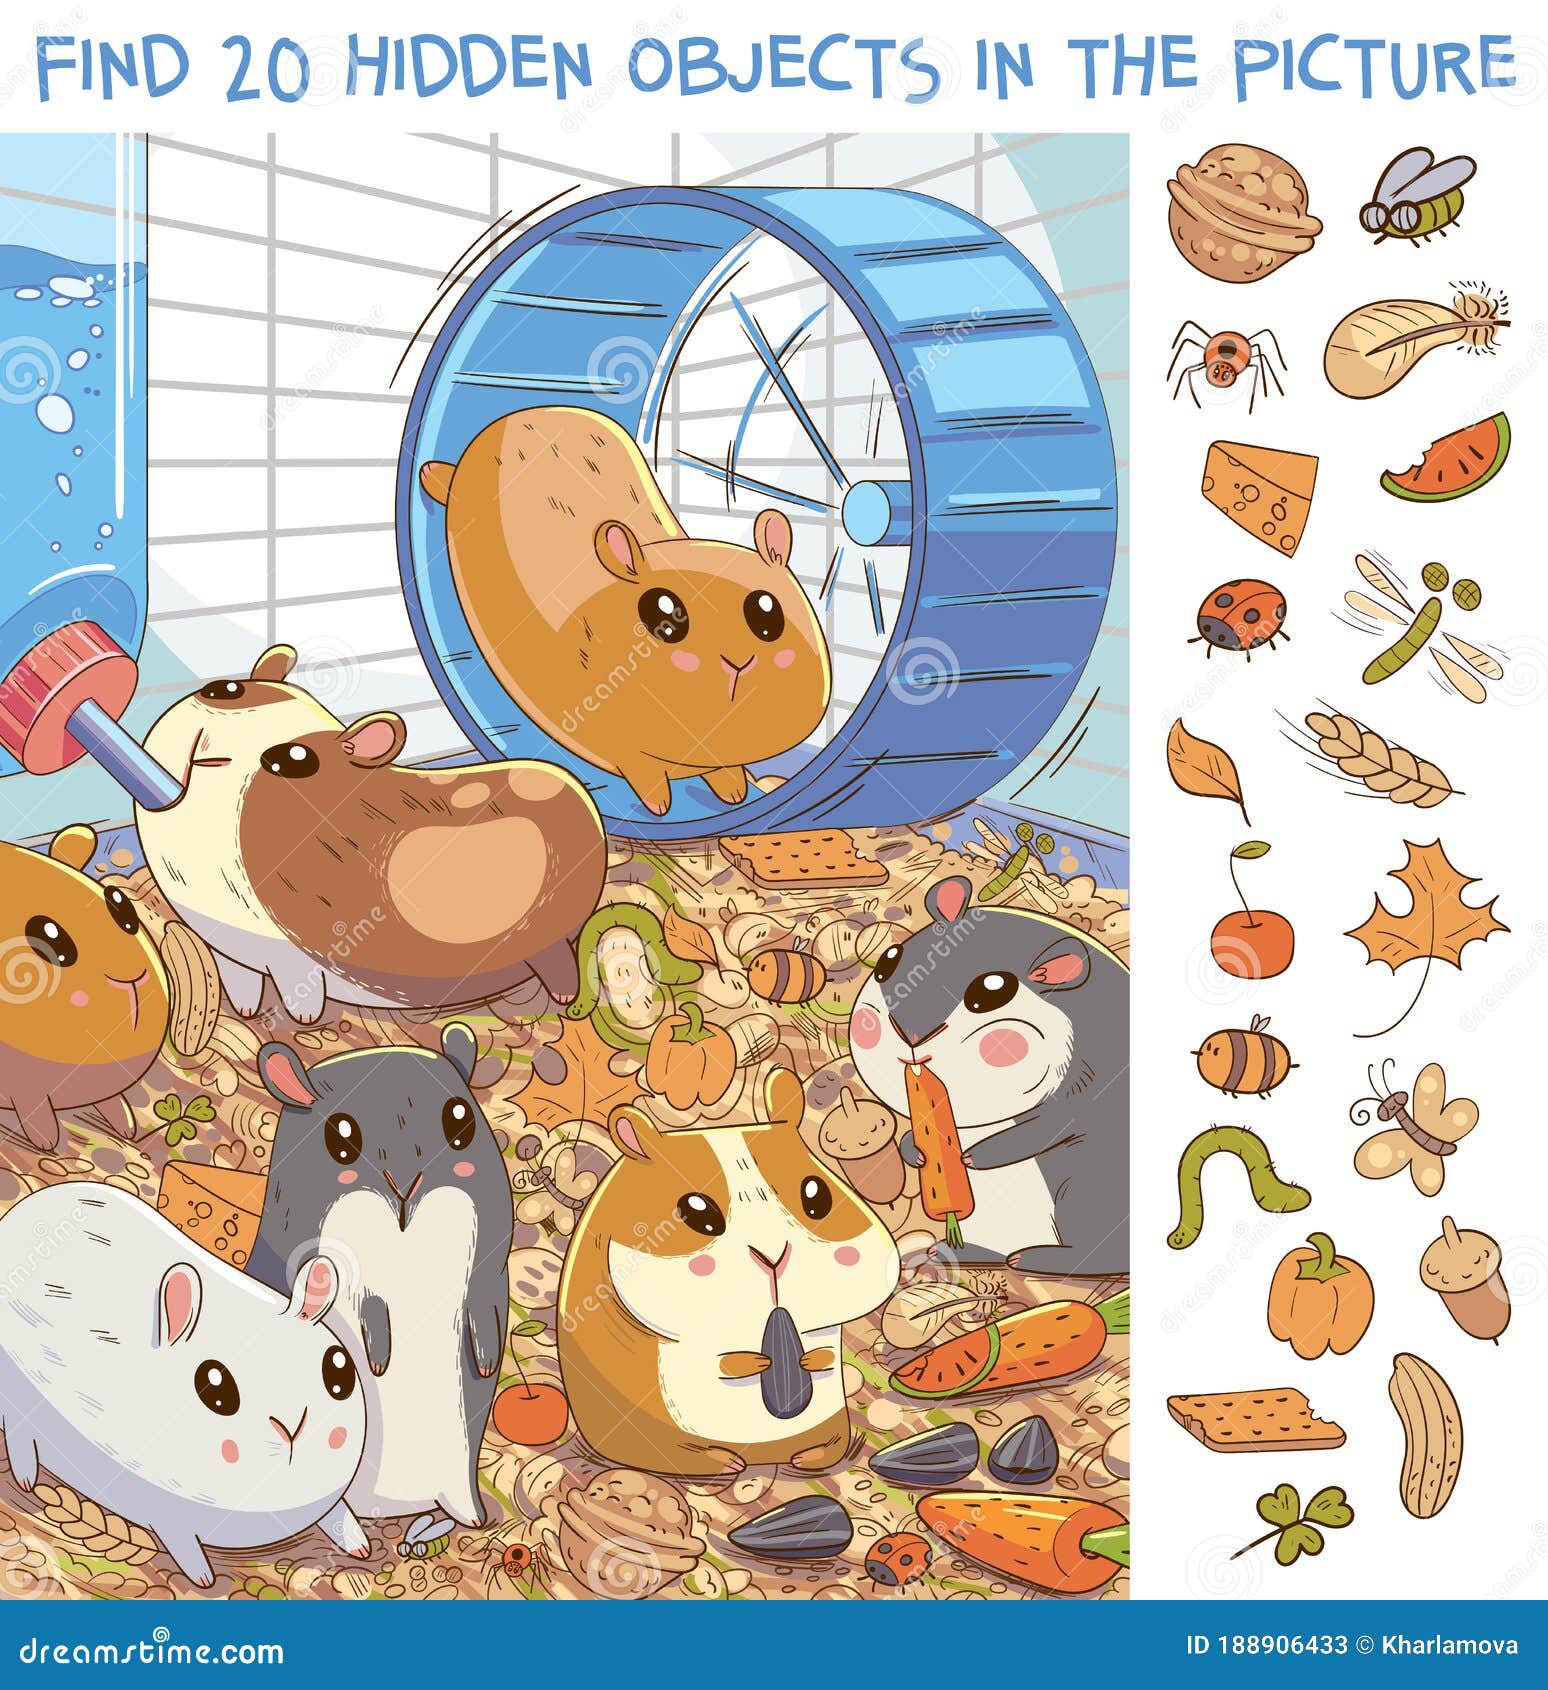 find 20 hidden objects in the picture. hamsters in a cage